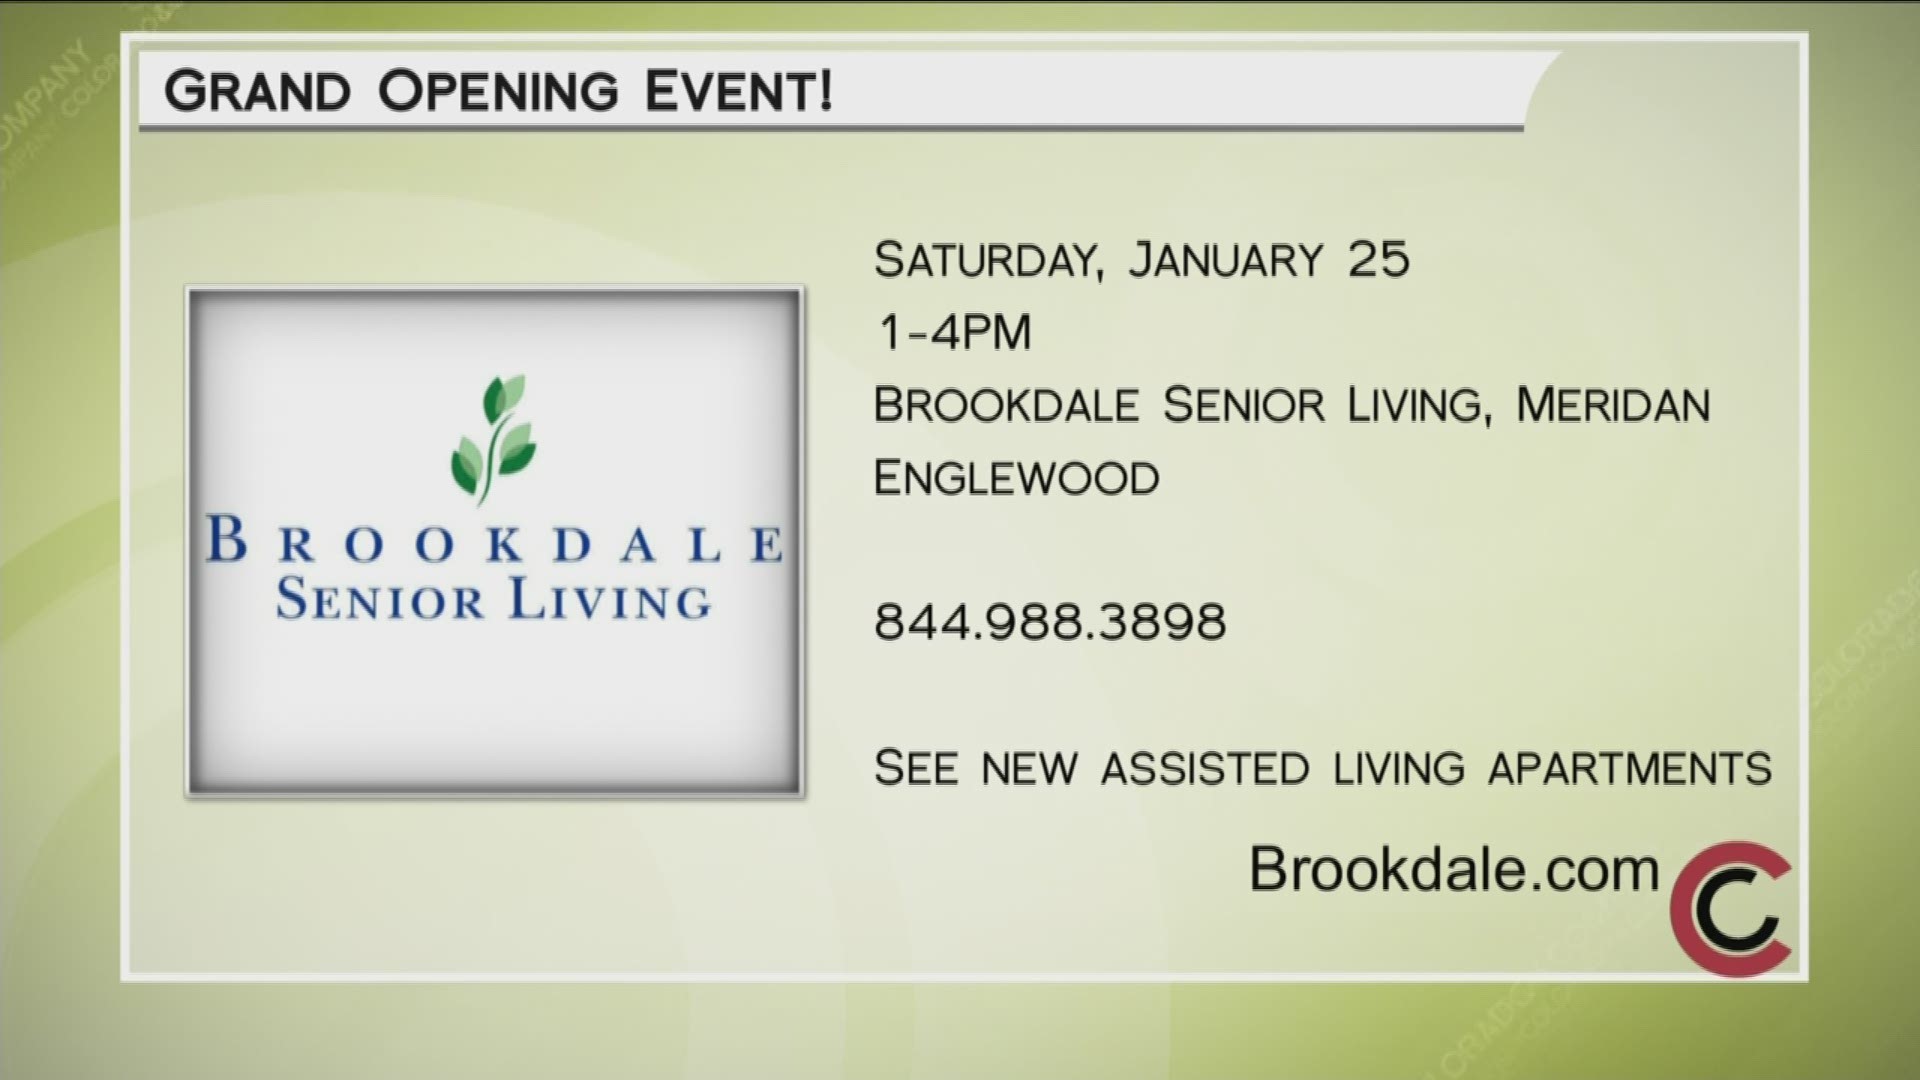 Learn more about Brookdale Senior Living by calling 1.844.988.3898 or find them online at Brookdale.com.